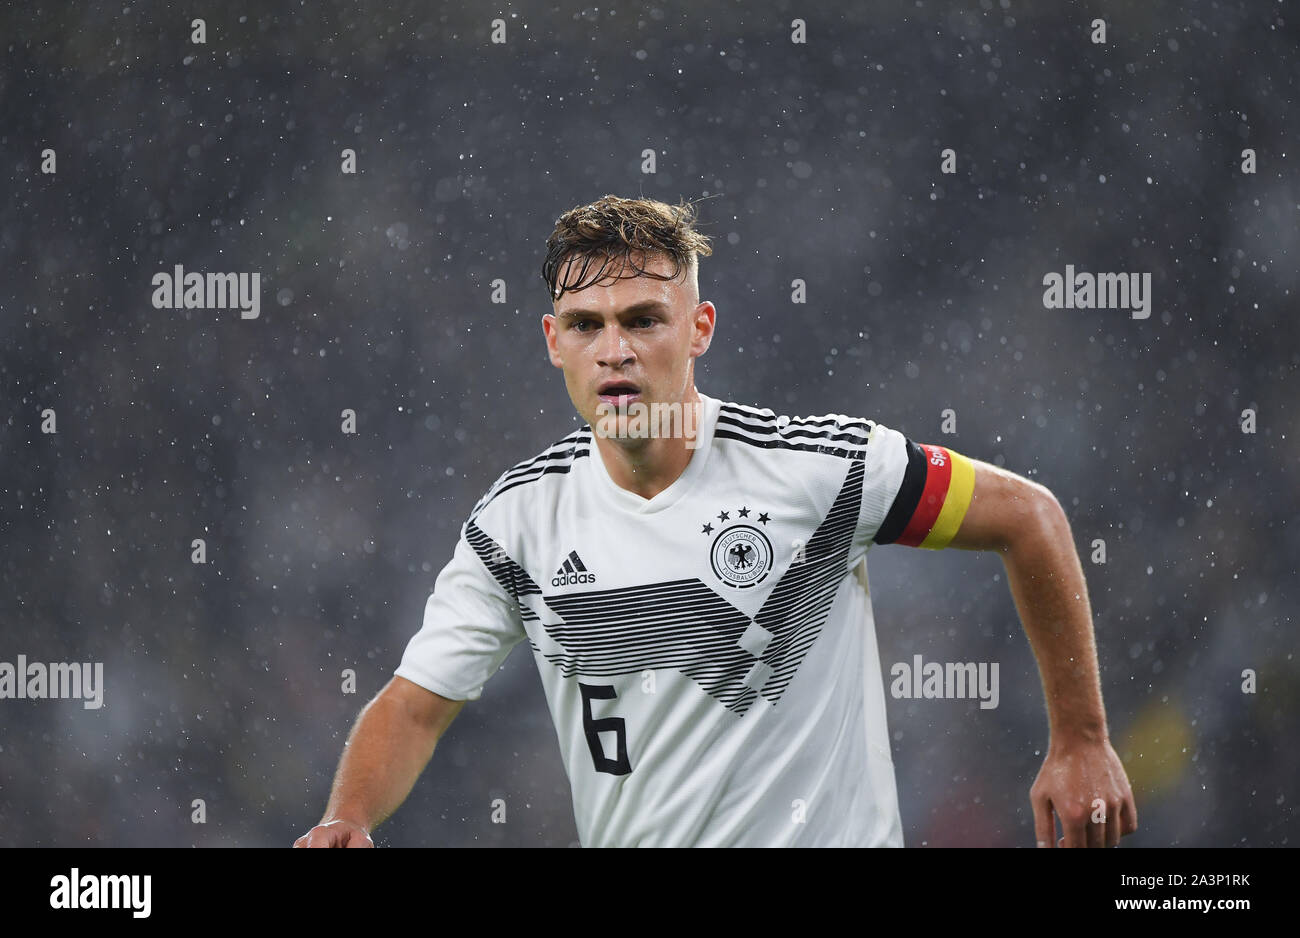 Spielfuehrer High Resolution Stock Photography and Images - Alamy